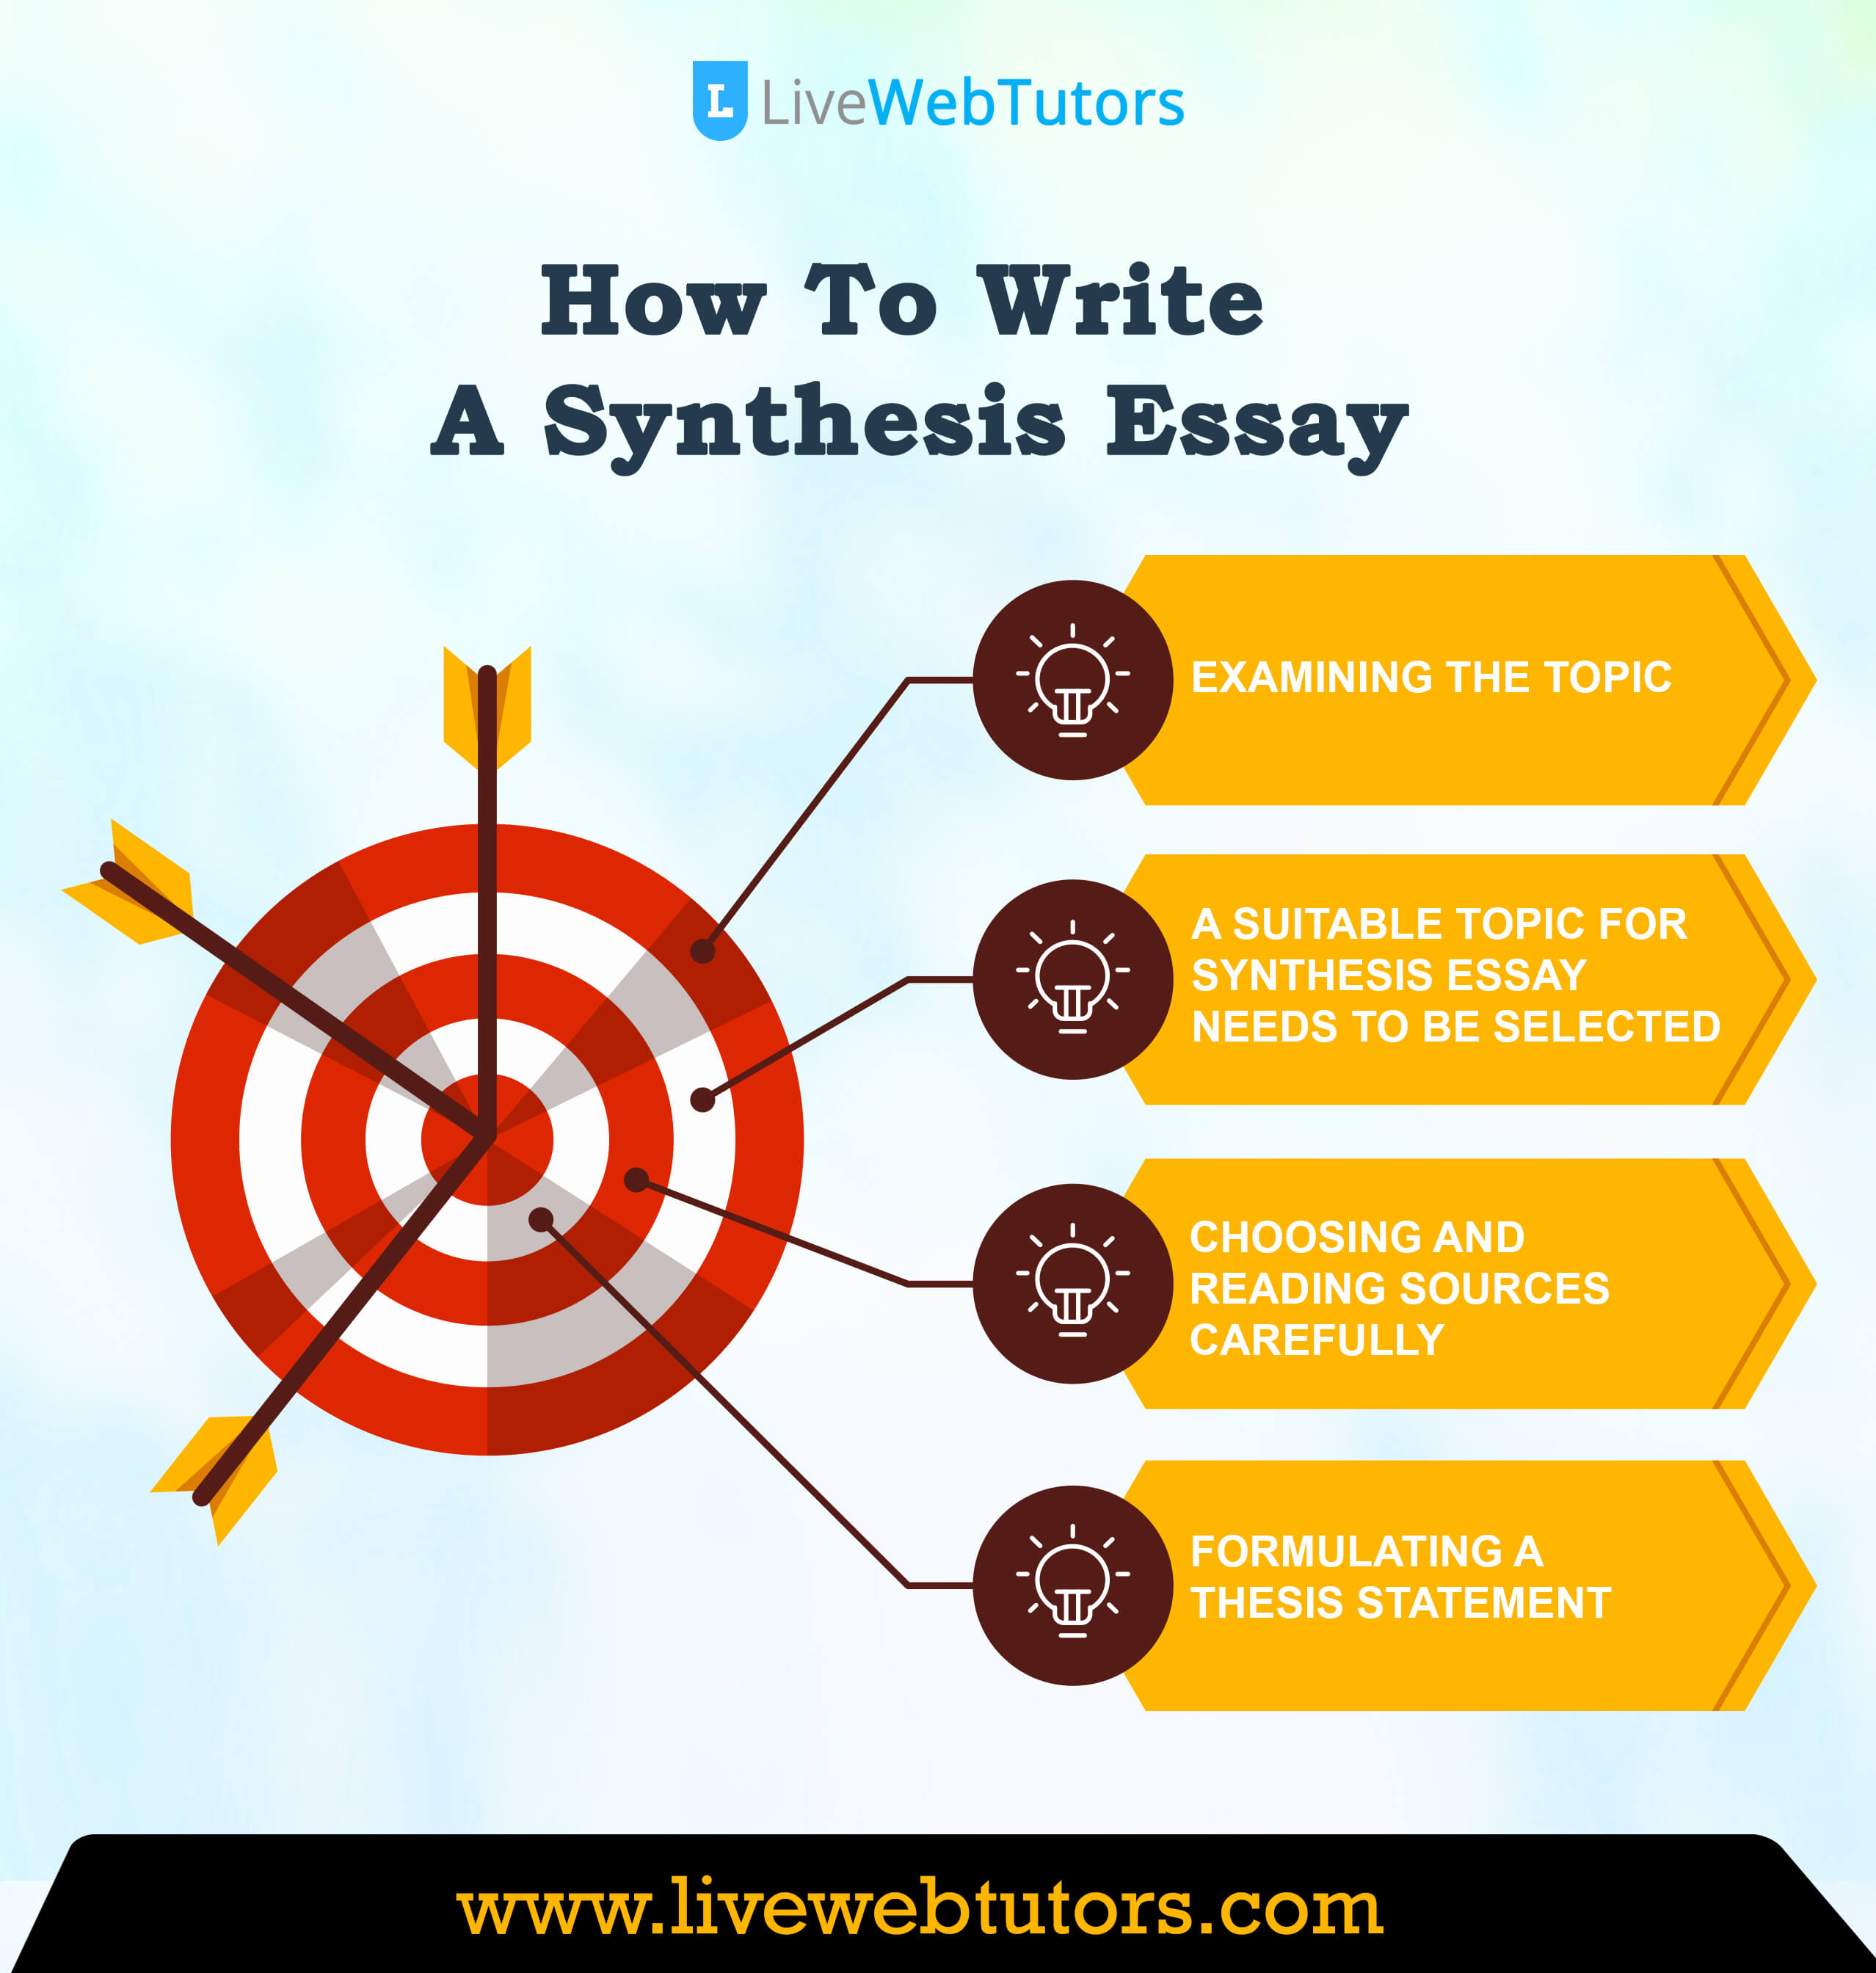 How to write a thesis statement for a synthesis essay